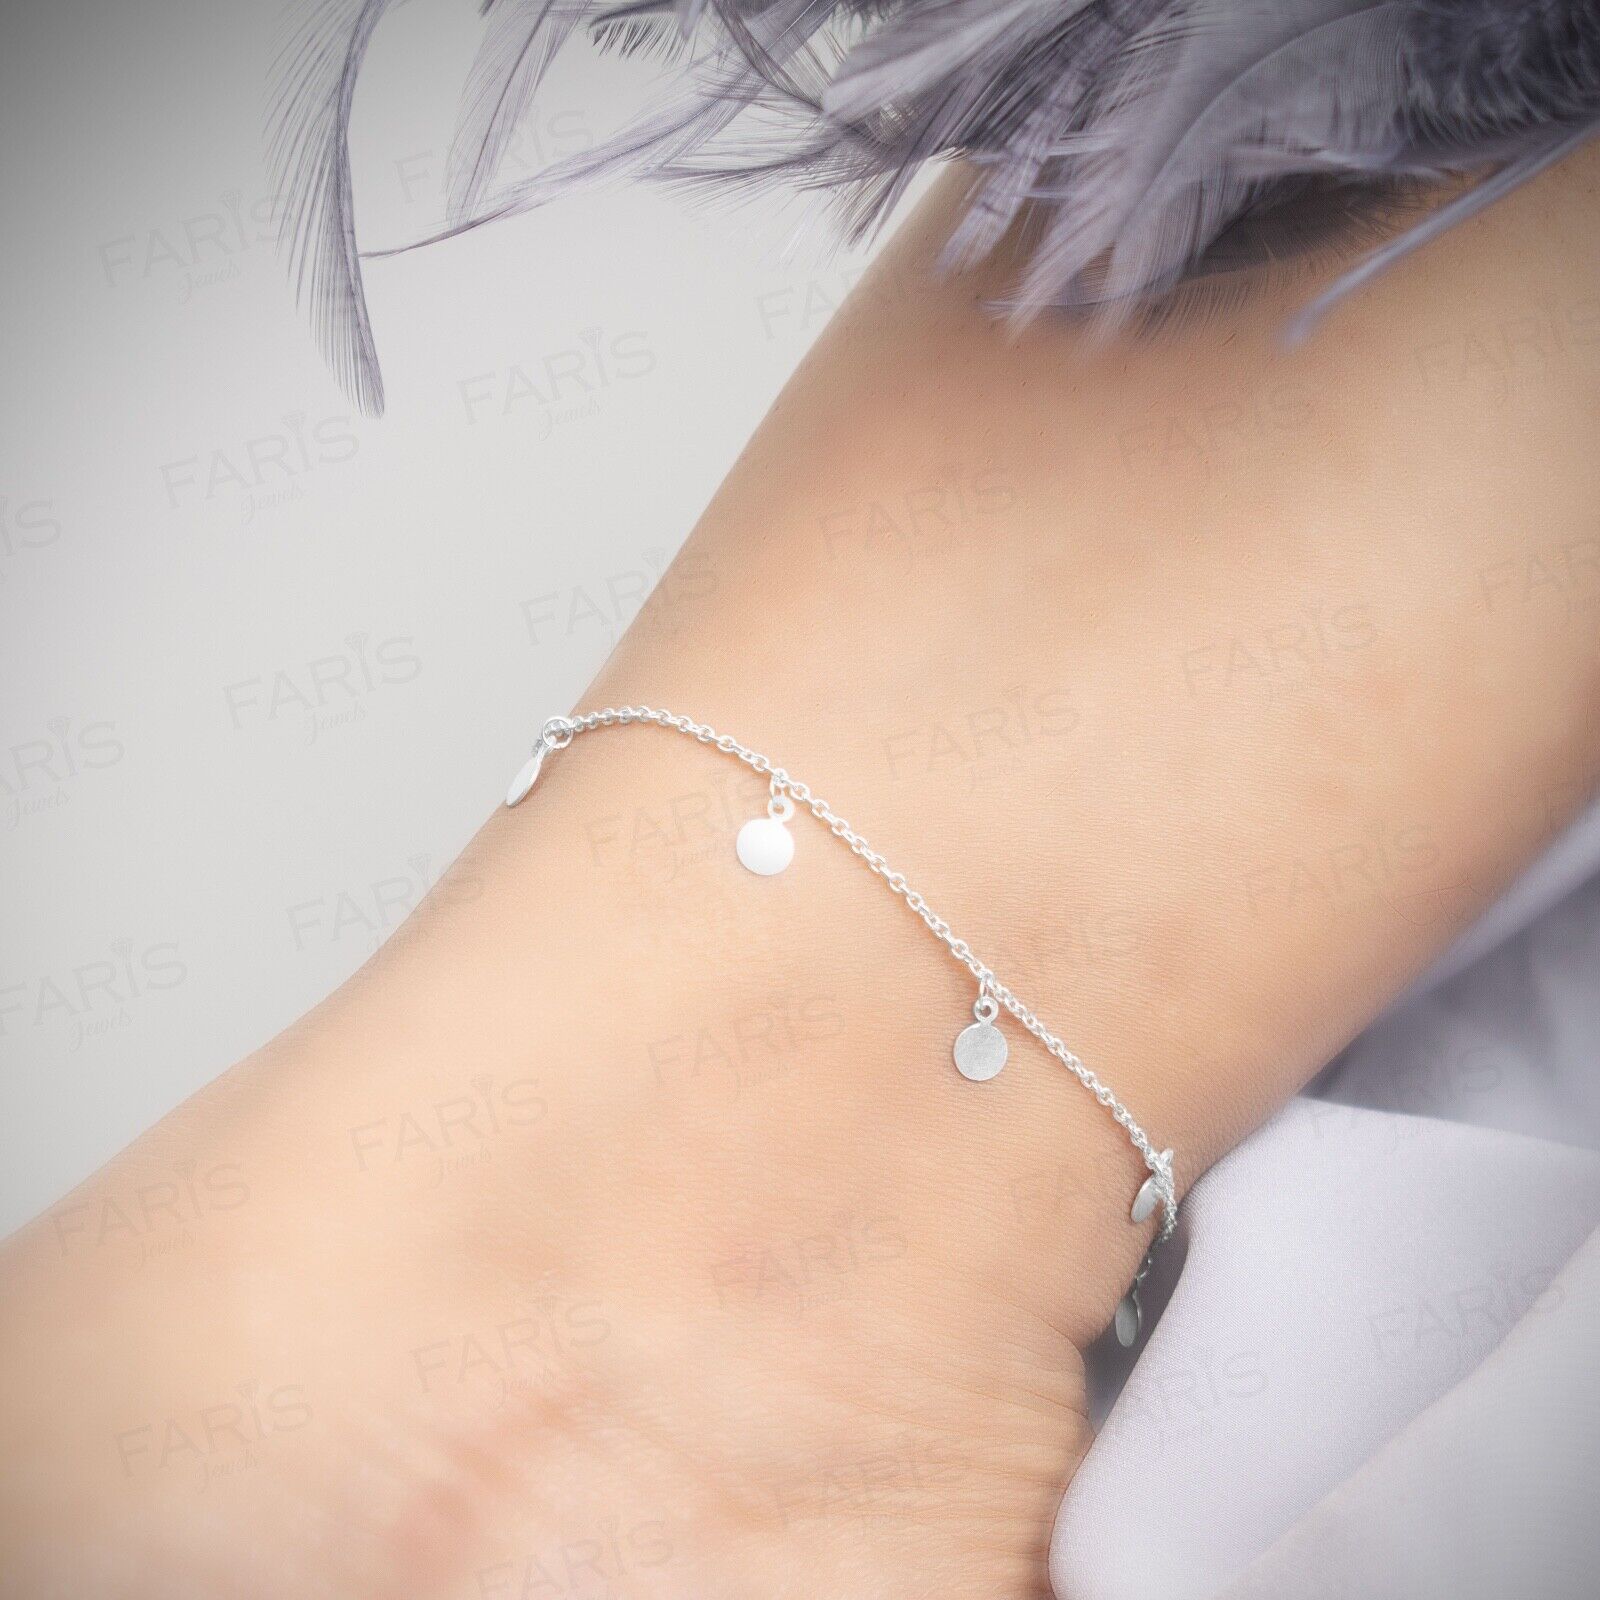 Adjustable Solid 925 Sterling Silver Round Charm Anklet Ladies Jewellery Gift - Faris Jewels